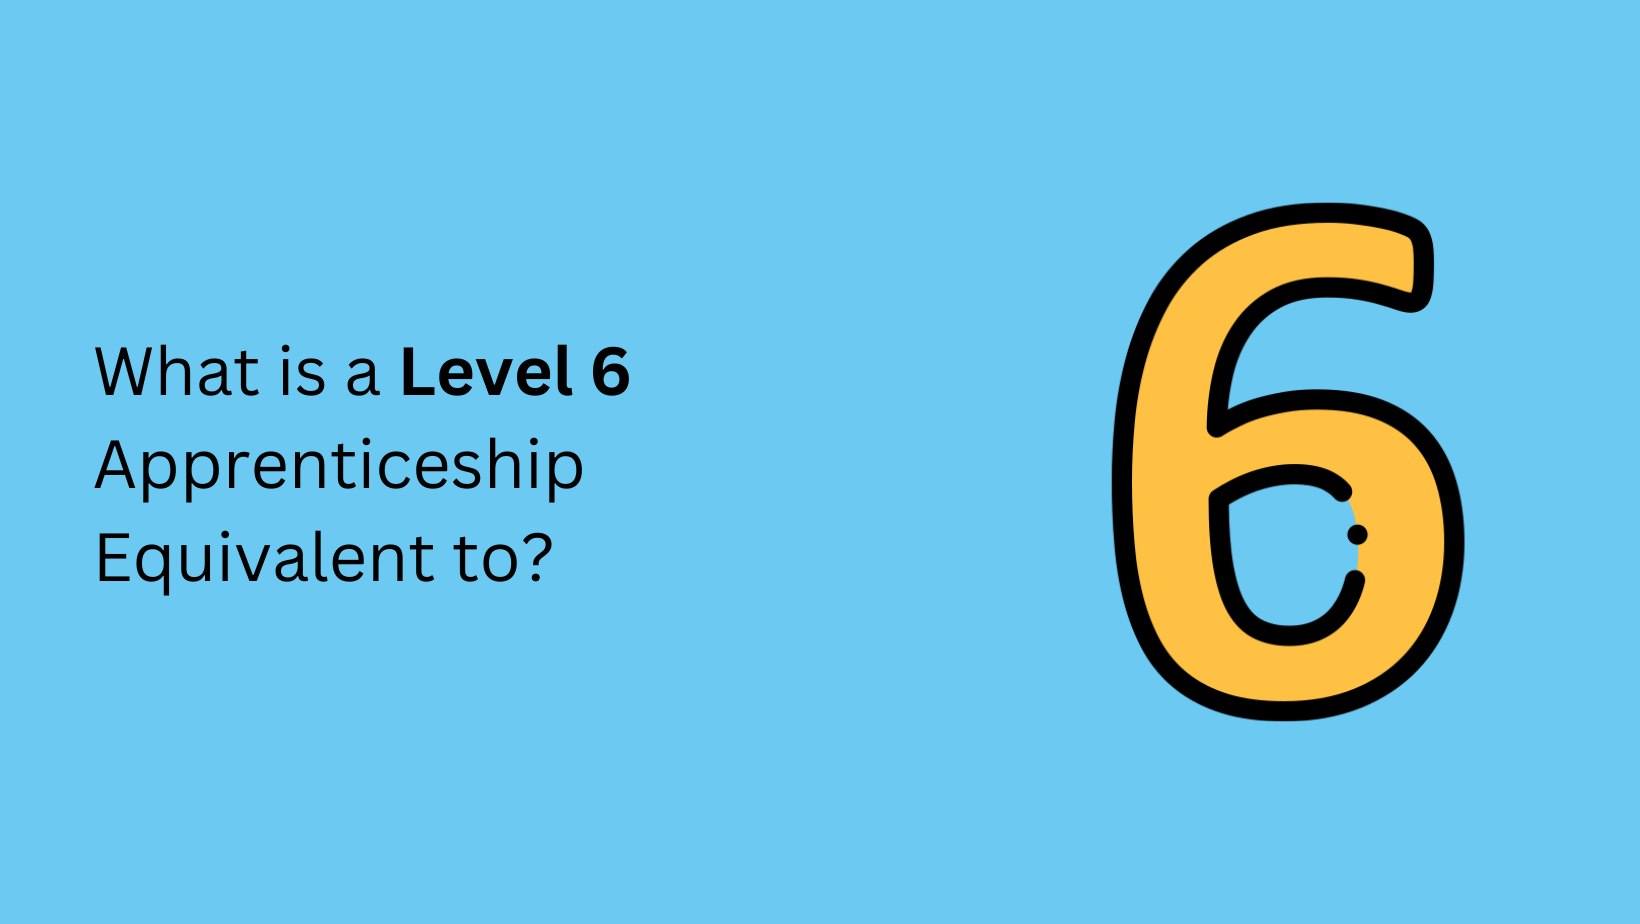 What is a Level 6 Apprenticeship Equivalent to